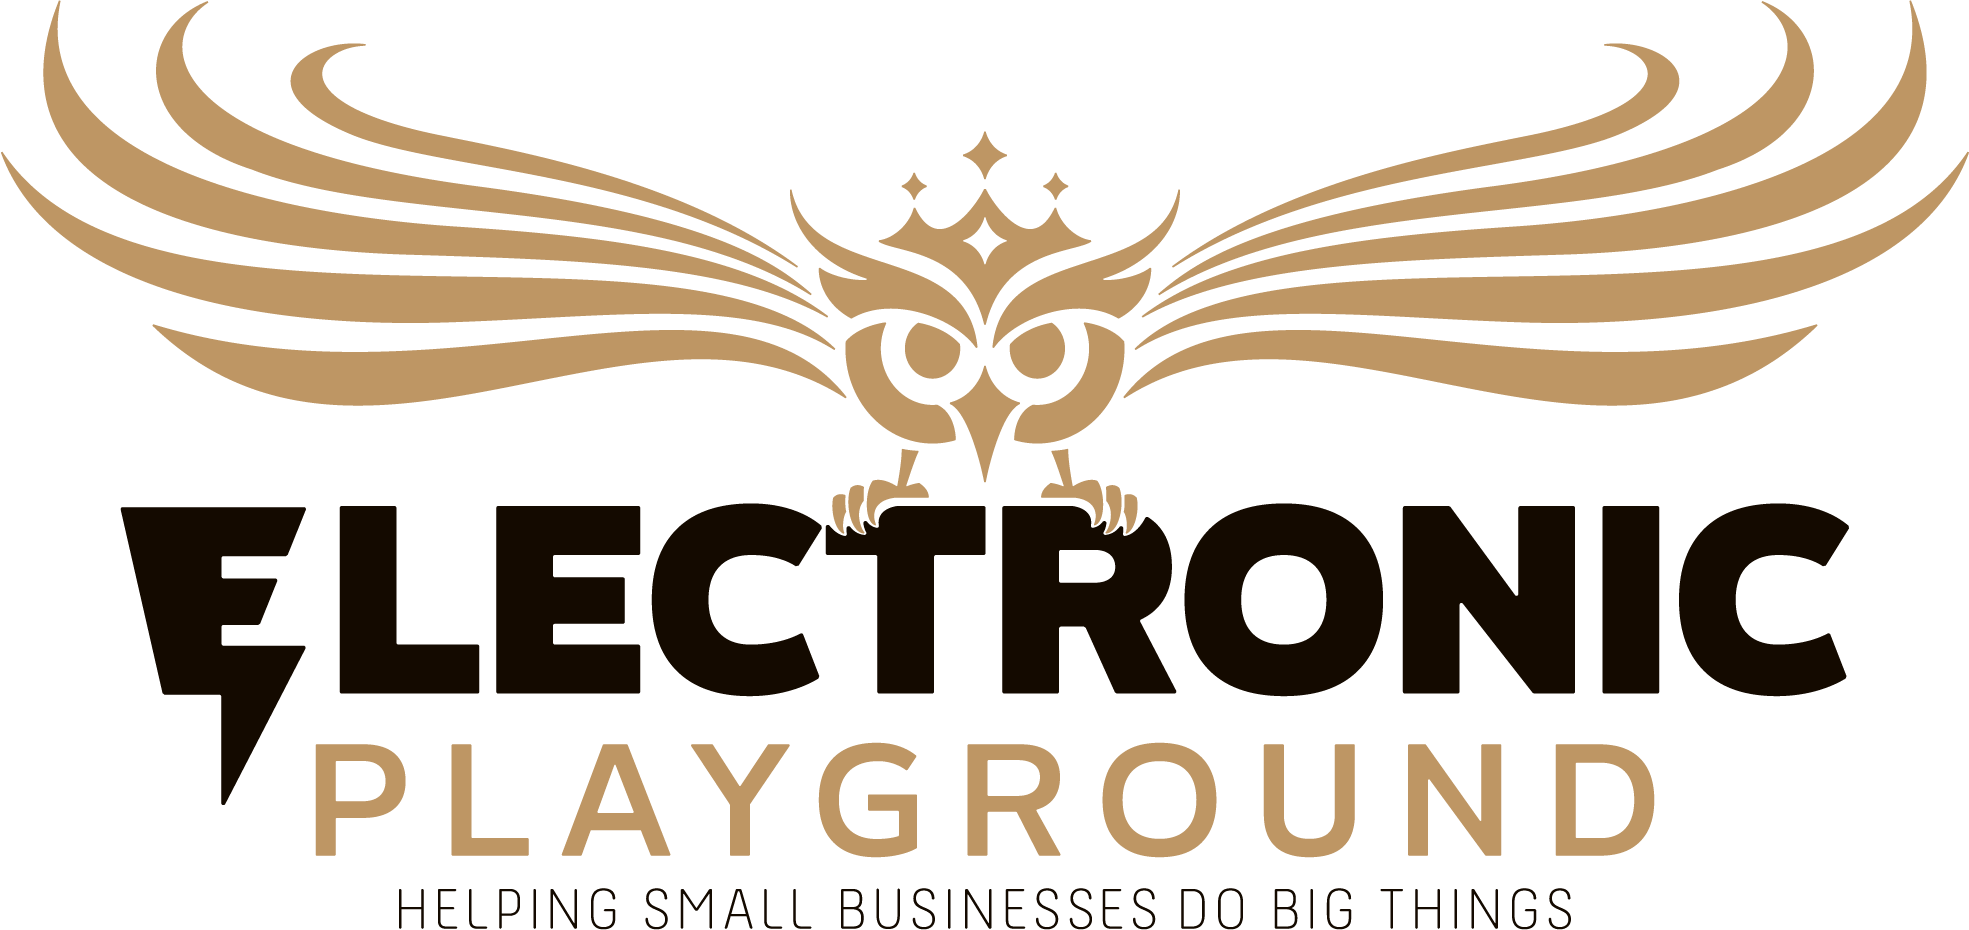 Electronic Playground Domains